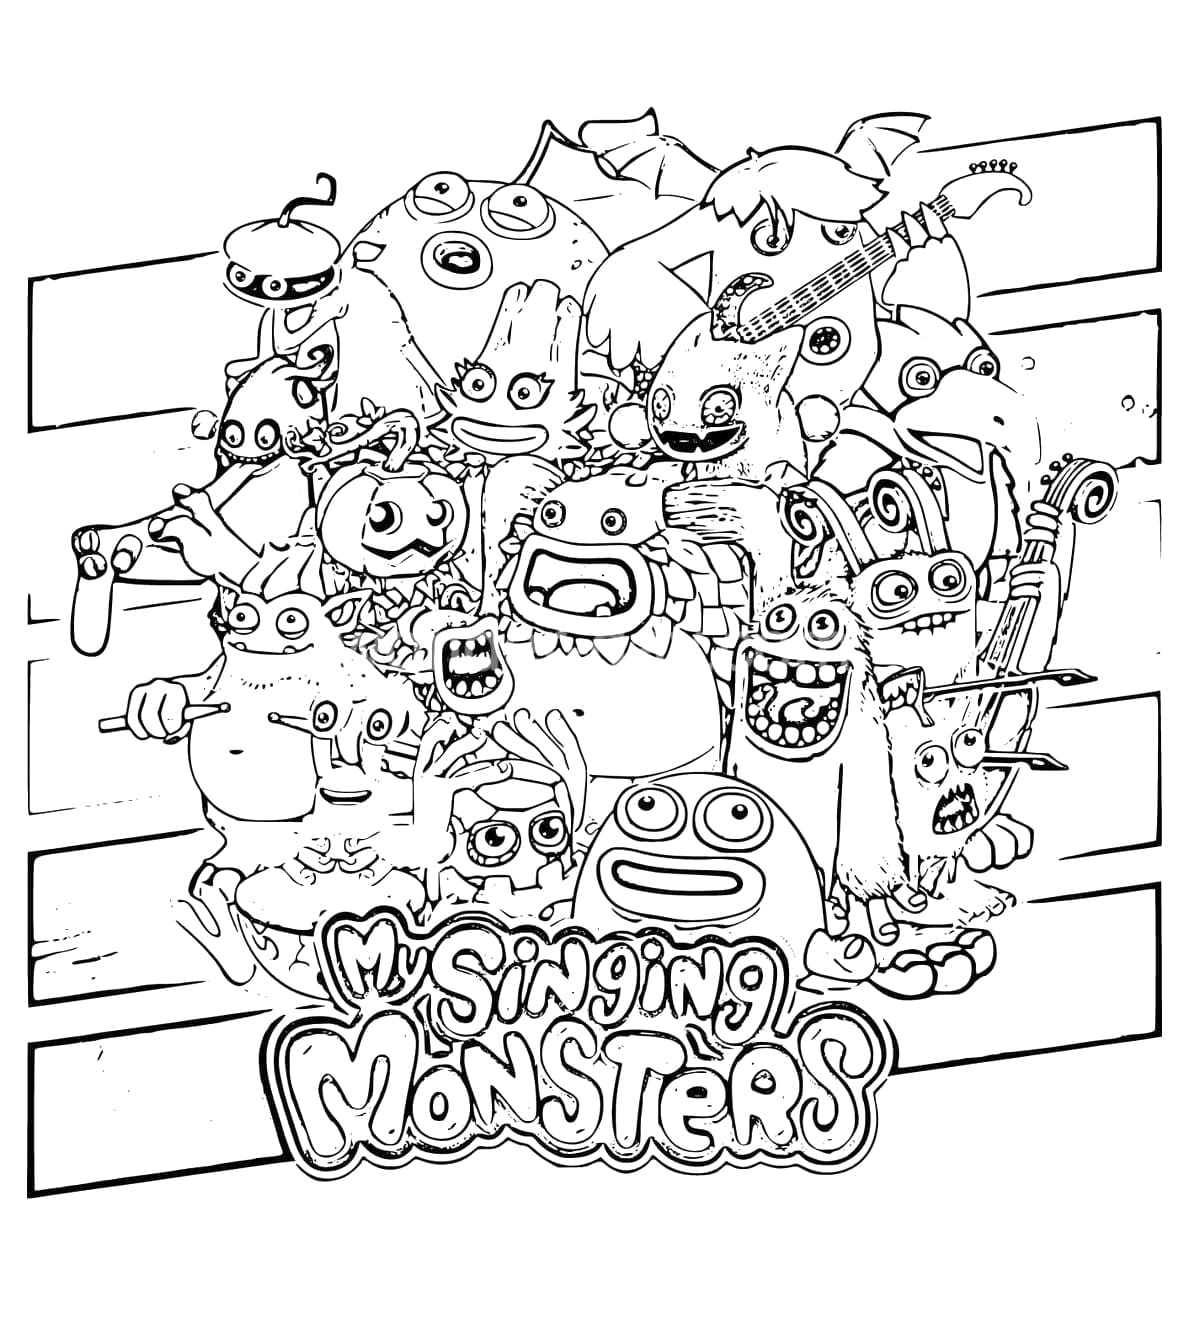 Drawing of my singing monsters coloring page